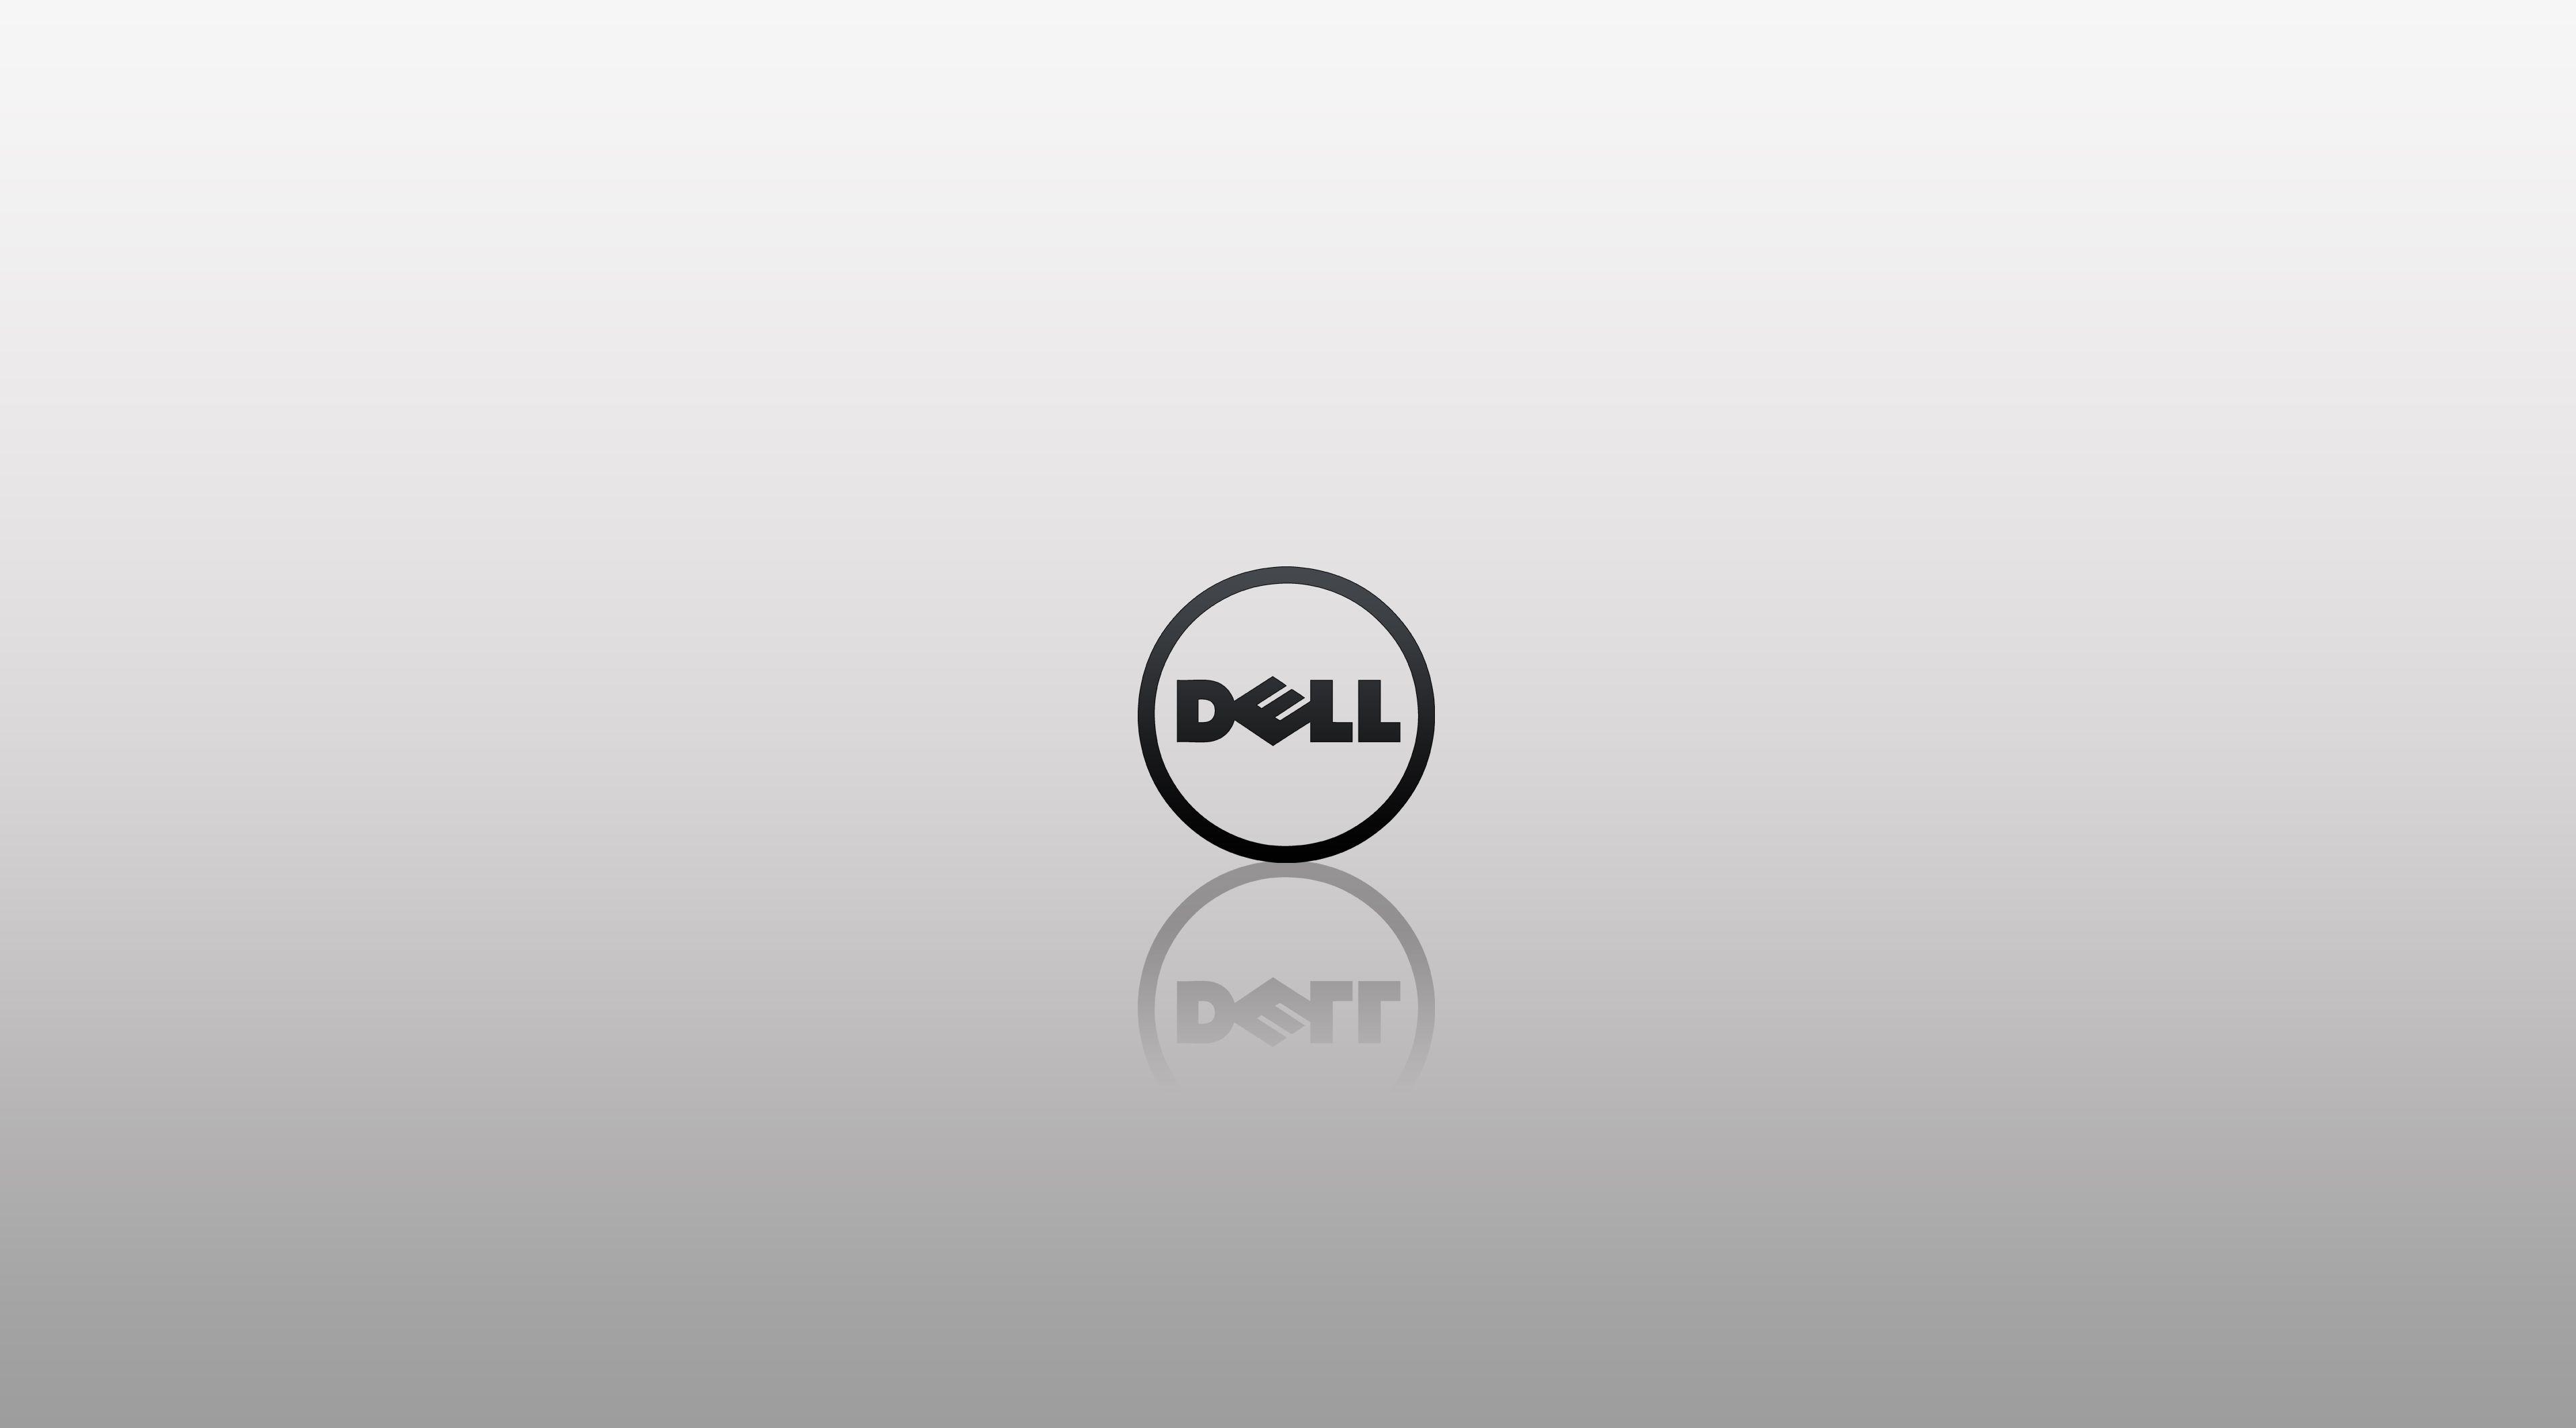 Dell 4k Ultra Hd Wallpapers Top Free Dell 4k Ultra Hd Backgrounds Wallpaperaccess